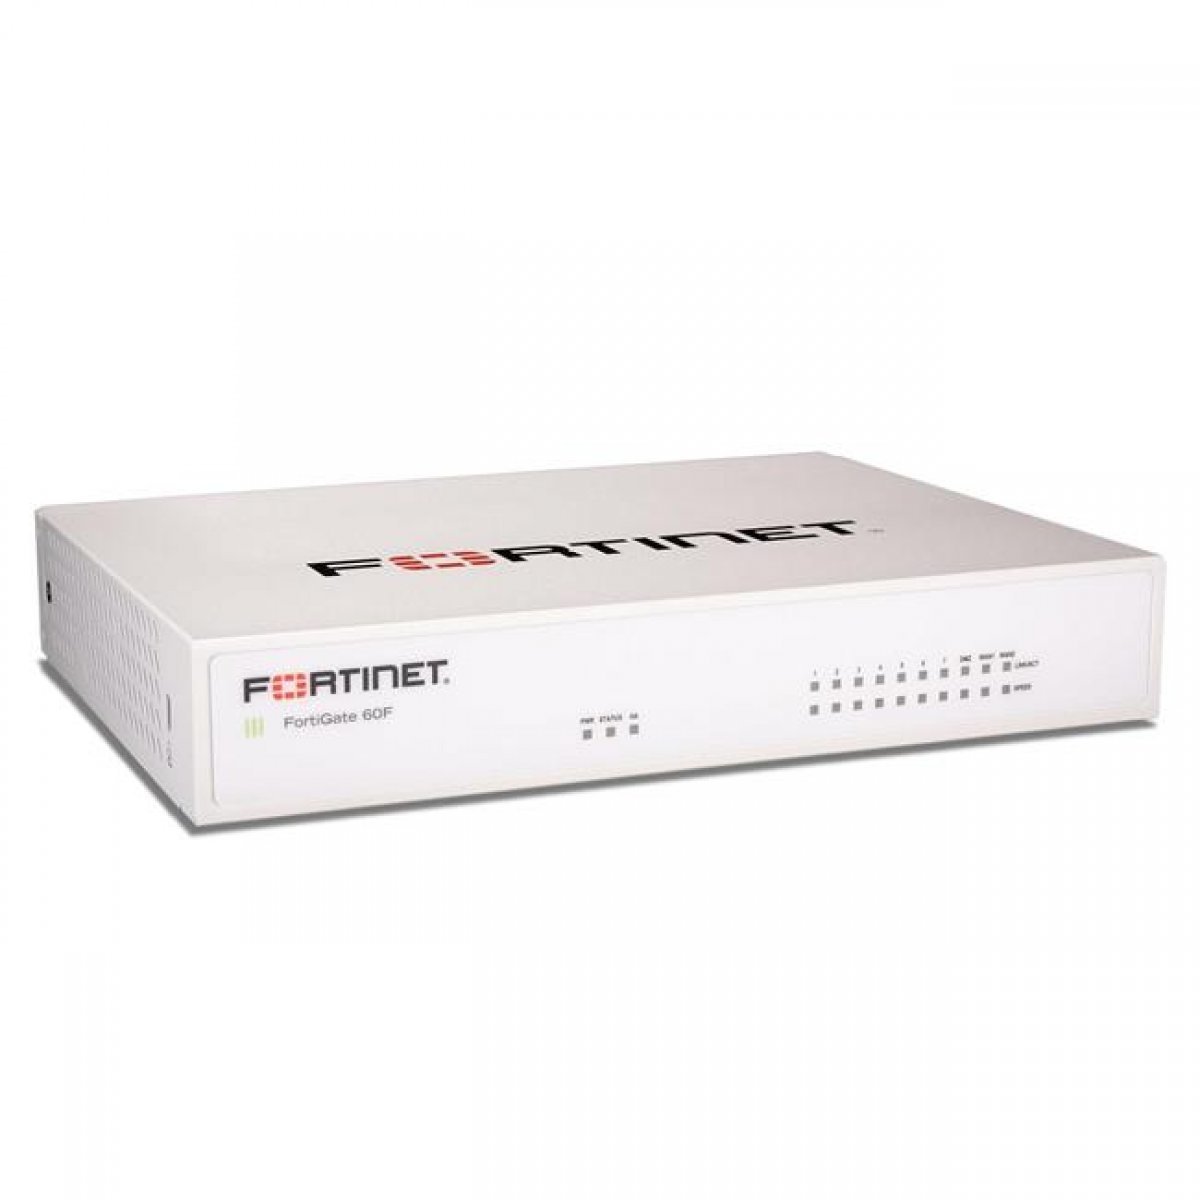 FortiGate-60F Hardware plus 1 Year 24x7 FortiCare and FortiGuard Unified Threat Protection (UTP)